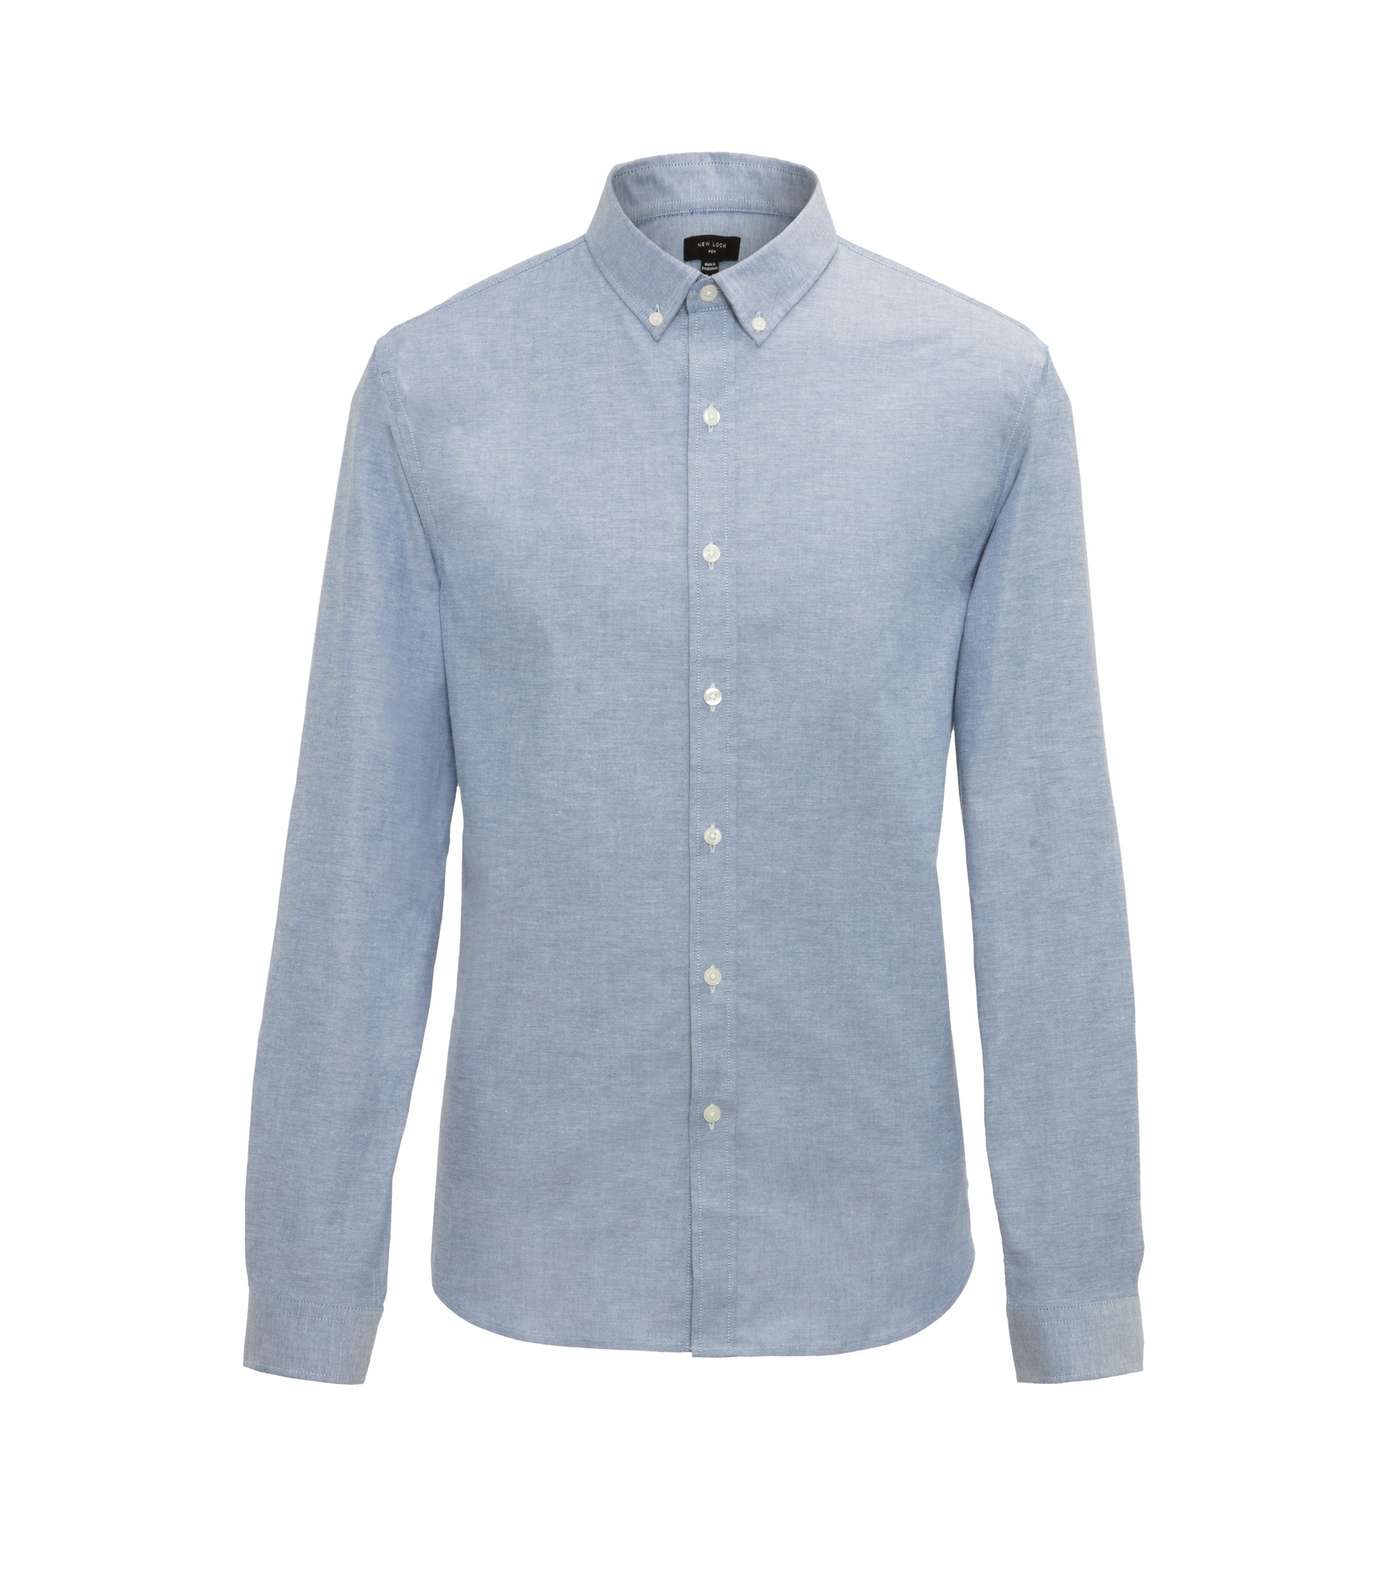 Pale Blue Muscle Fit Oxford Shirt 